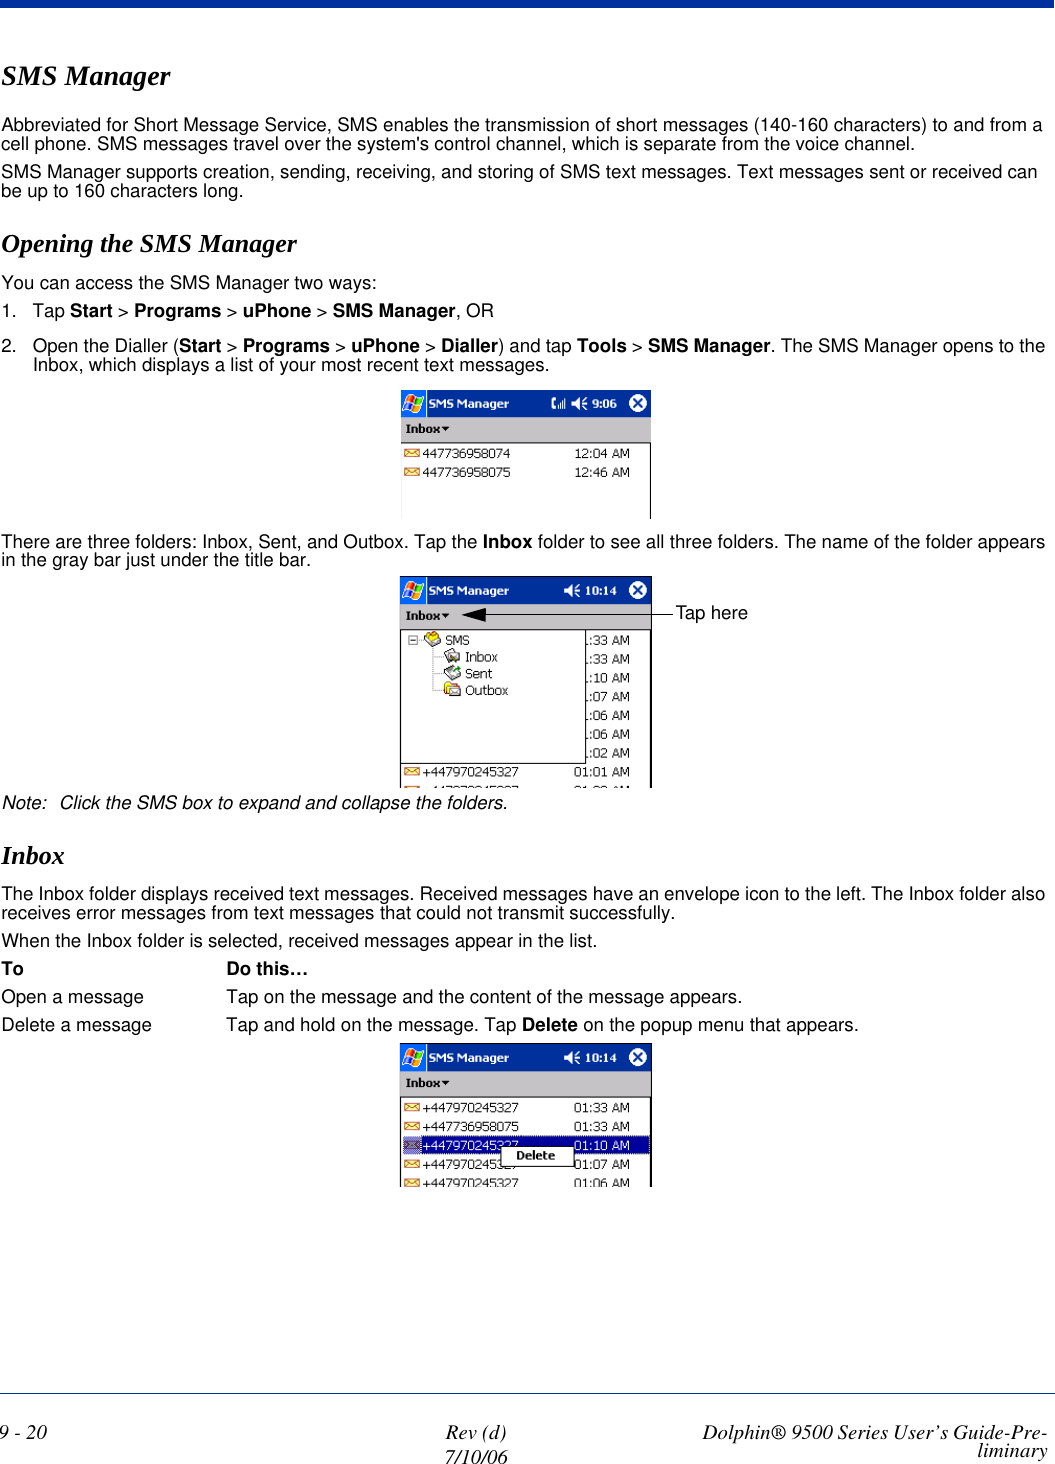 9 - 20 Rev (d)7/10/06 Dolphin® 9500 Series User’s Guide-Pre-liminarySMS ManagerAbbreviated for Short Message Service, SMS enables the transmission of short messages (140-160 characters) to and from a cell phone. SMS messages travel over the system&apos;s control channel, which is separate from the voice channel.SMS Manager supports creation, sending, receiving, and storing of SMS text messages. Text messages sent or received can be up to 160 characters long.Opening the SMS ManagerYou can access the SMS Manager two ways:1. Tap Start &gt; Programs &gt; uPhone &gt; SMS Manager, OR2. Open the Dialler (Start &gt; Programs &gt; uPhone &gt; Dialler) and tap Tools &gt; SMS Manager. The SMS Manager opens to the Inbox, which displays a list of your most recent text messages. There are three folders: Inbox, Sent, and Outbox. Tap the Inbox folder to see all three folders. The name of the folder appears in the gray bar just under the title bar.Note: Click the SMS box to expand and collapse the folders.InboxThe Inbox folder displays received text messages. Received messages have an envelope icon to the left. The Inbox folder also receives error messages from text messages that could not transmit successfully.When the Inbox folder is selected, received messages appear in the list. To Do this…Open a message Tap on the message and the content of the message appears.Delete a message Tap and hold on the message. Tap Delete on the popup menu that appears. Tap here